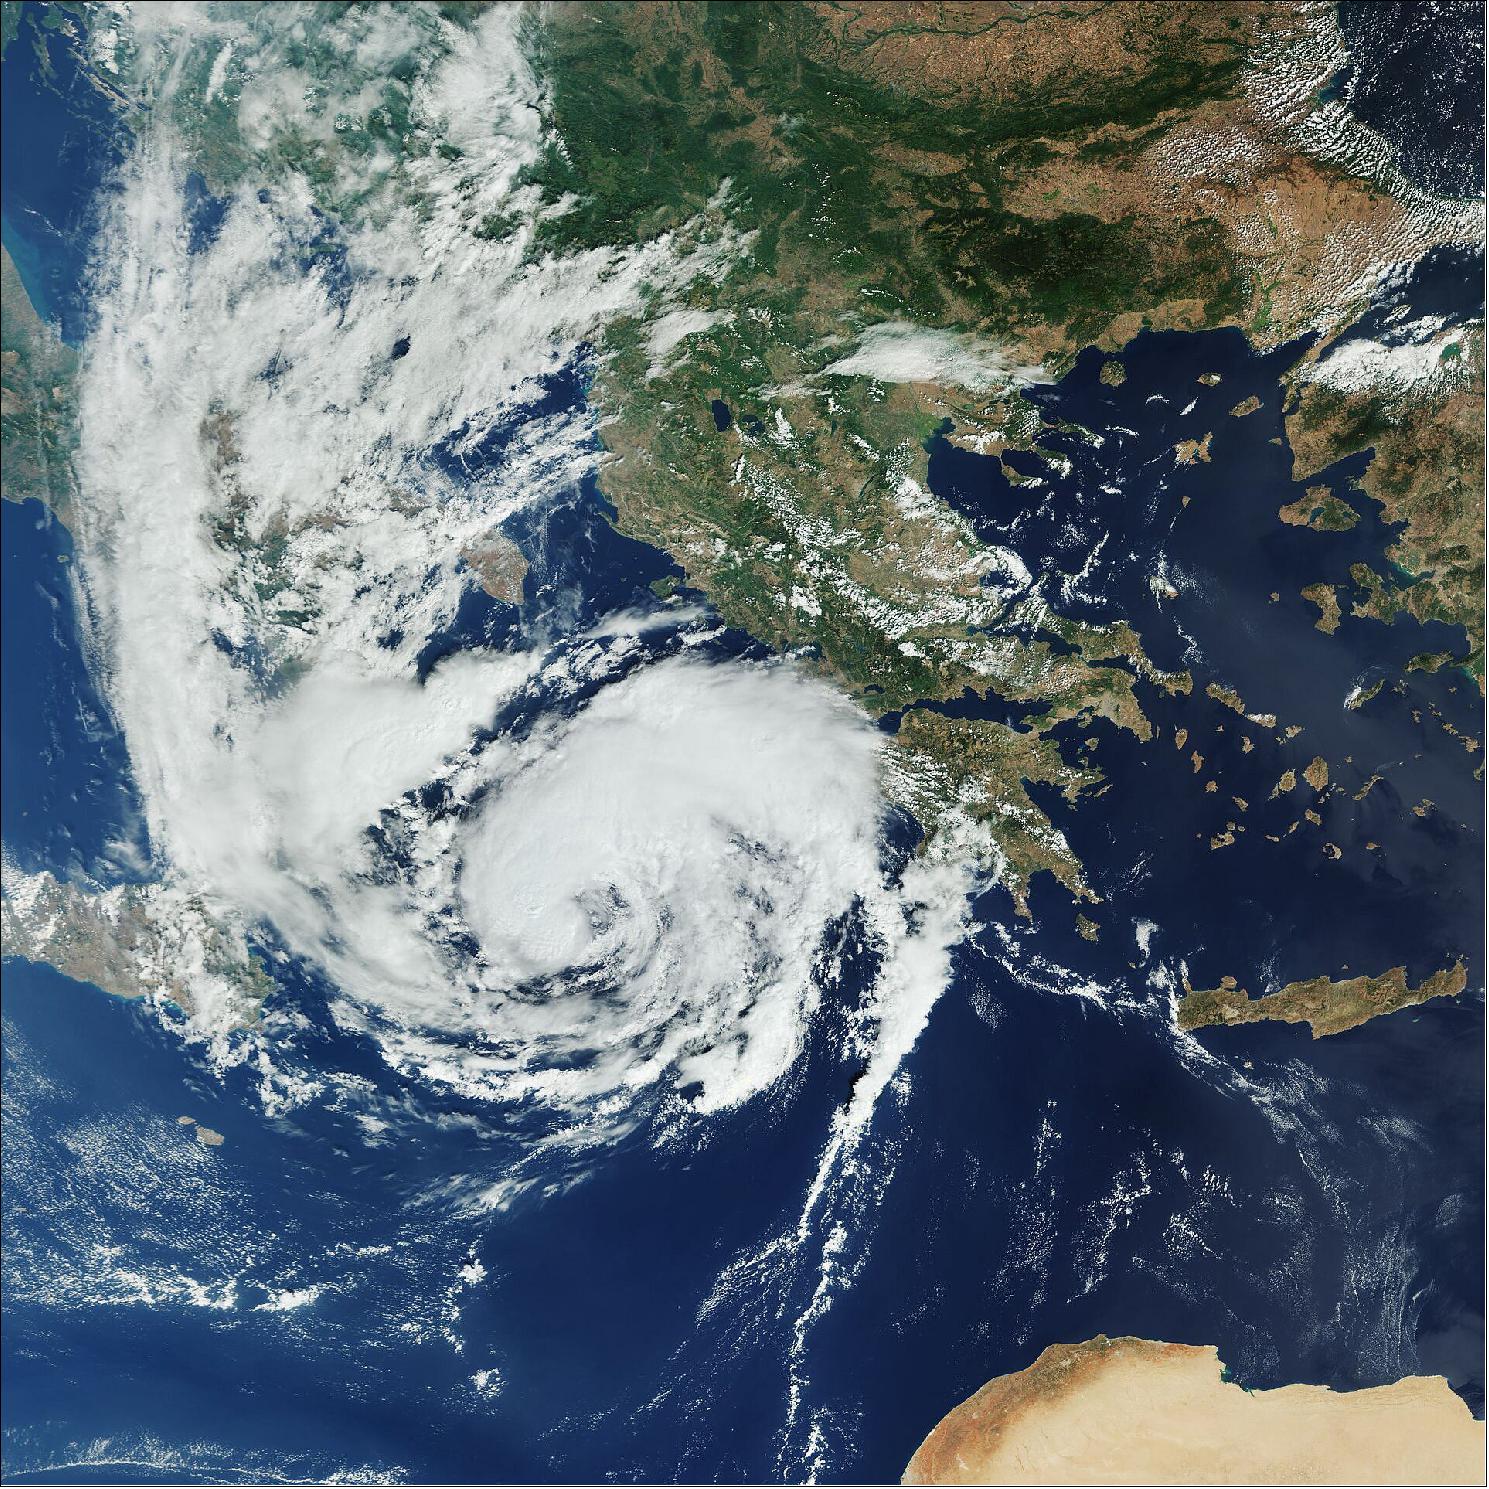 Figure 46: The Copernicus Sentinel-3 mission captured this image of the Mediterranean hurricane, or 'Medicane,' crossing the Ionian Sea and approaching Greece yesterday 17 September at 10:48 CEST. Medicane Ianos, set to make landfall over Greece today, is expected to bring hurricane-force winds and heavy rain (image credit: ESA, the image contains modified Copernicus Sentinel data (2020), processed by ESA, CC BY-SA 3.0 IGO)